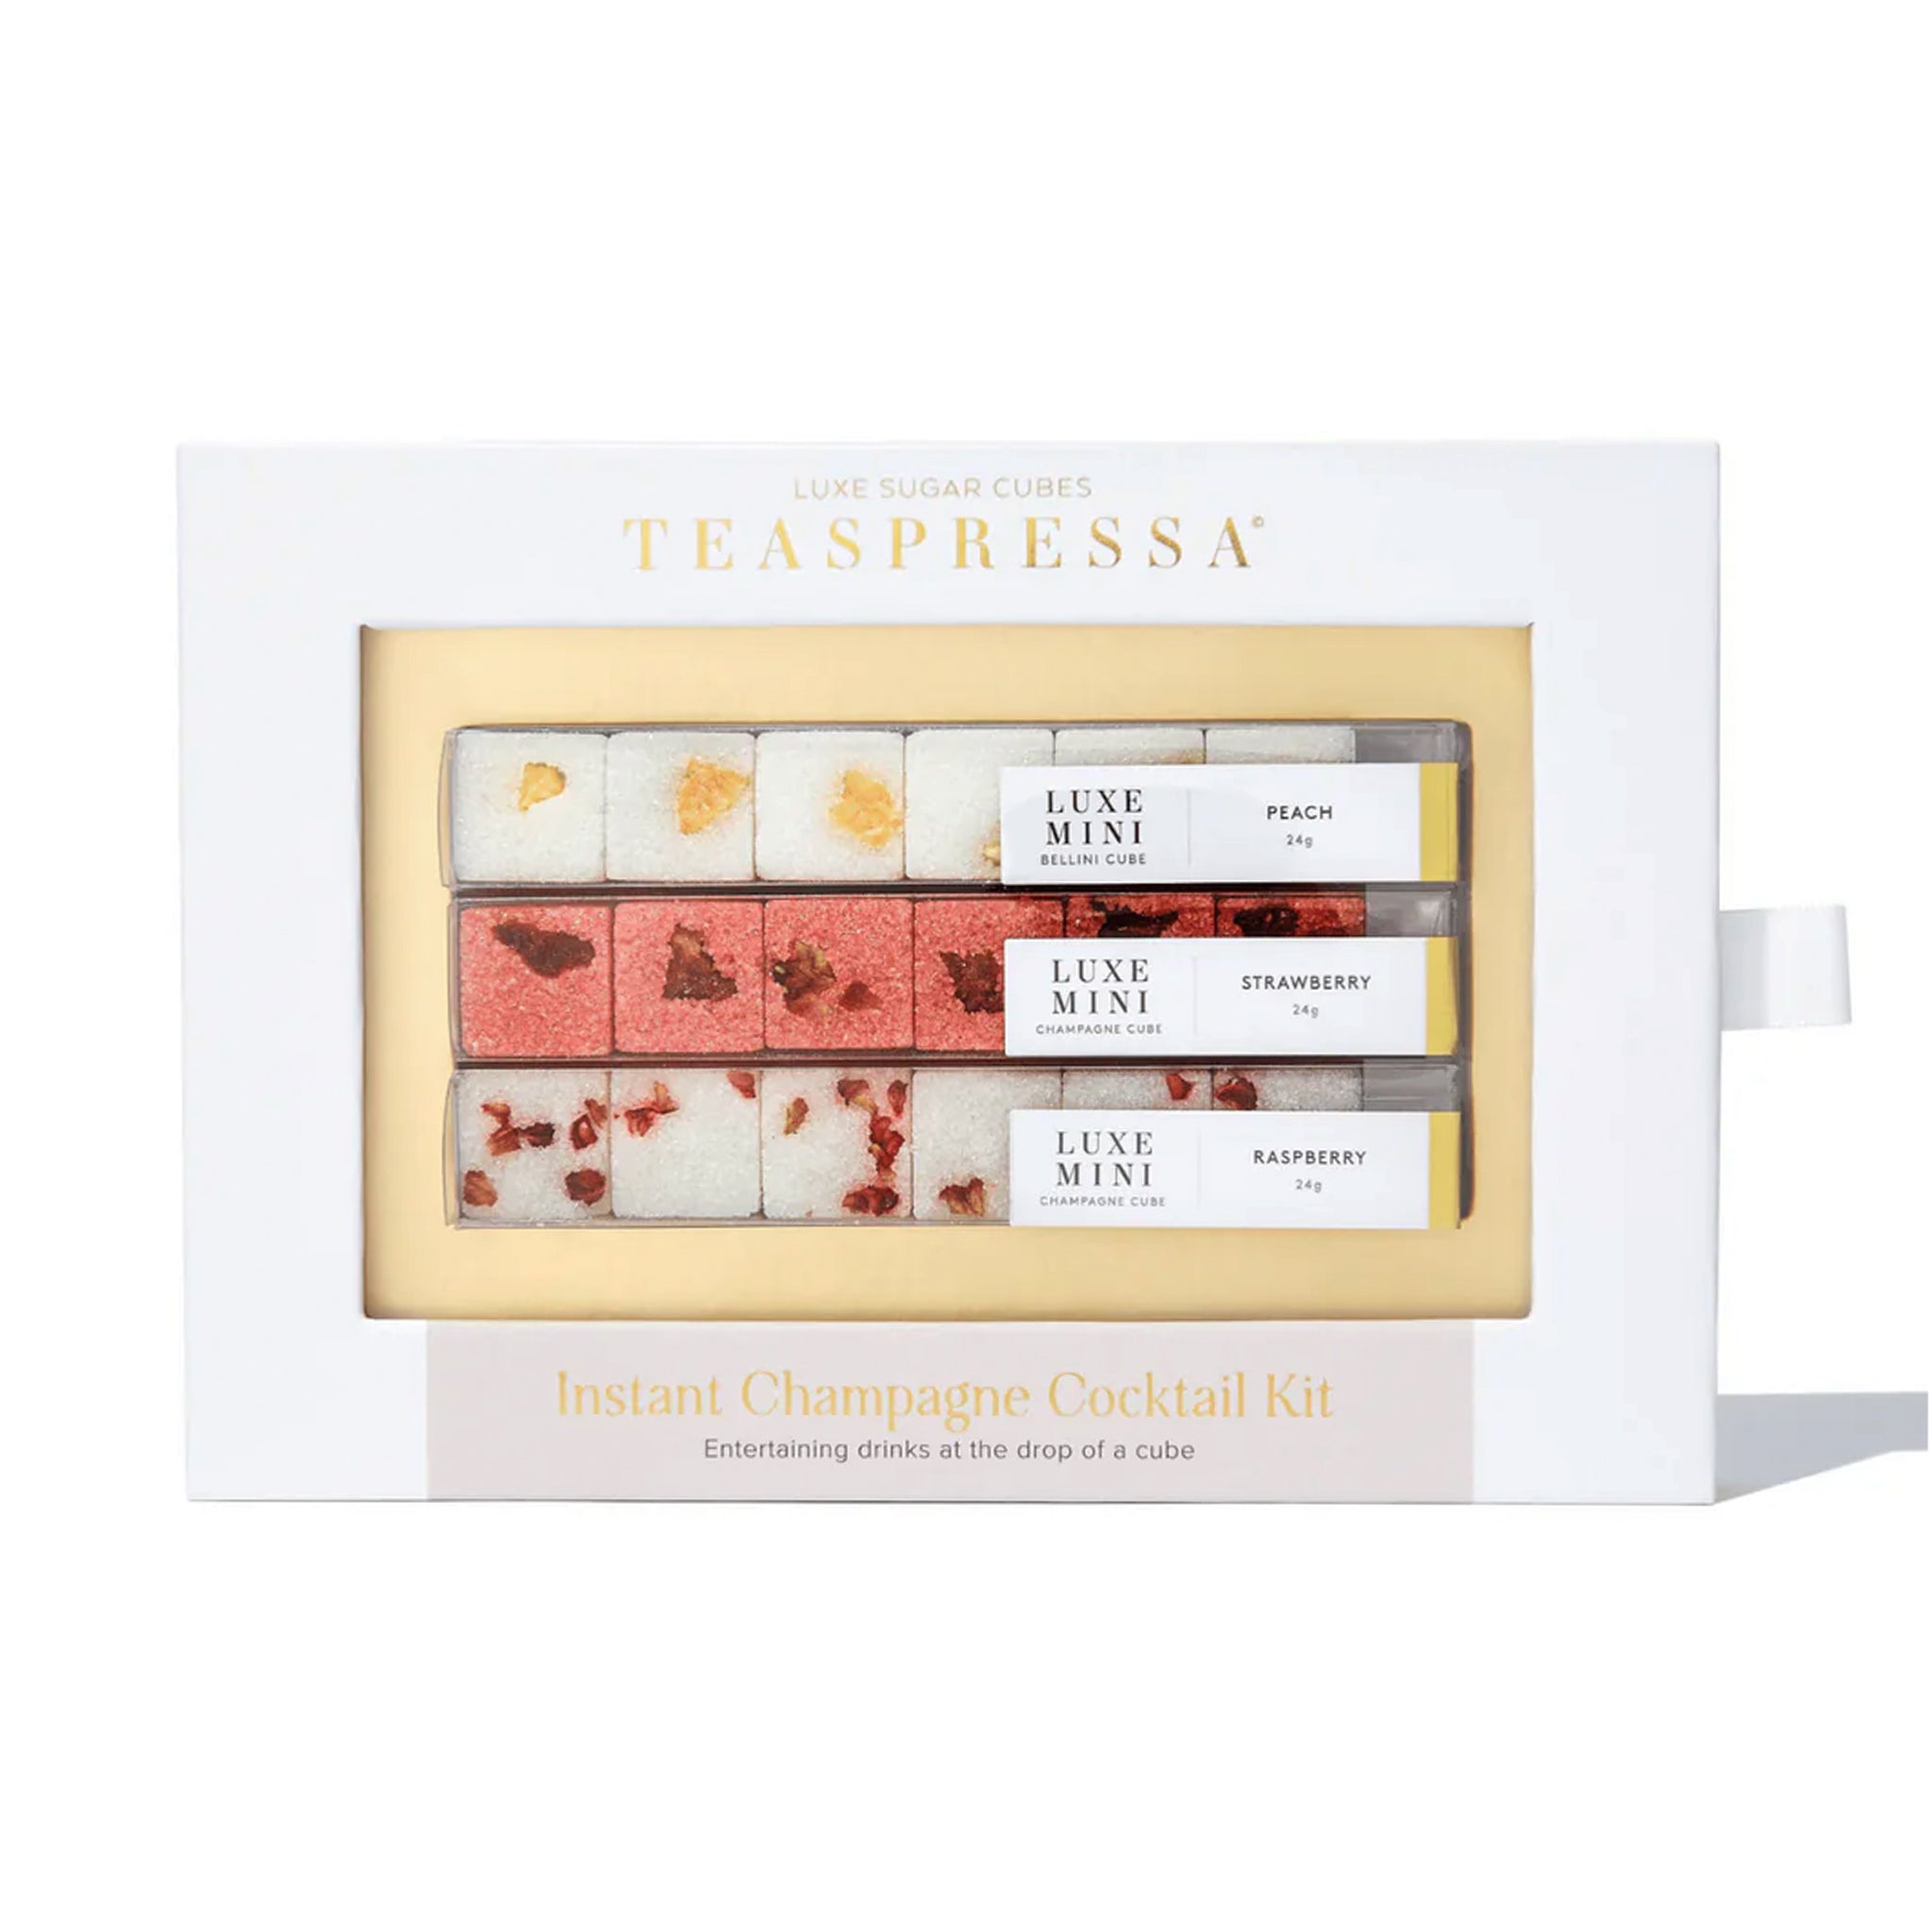 On a cream background is a sugar cube cocktail kit that reads, "Teaspressa Instant Champagne Cocktail Kit" with a set of three sugar cube strips that come in three flavors.